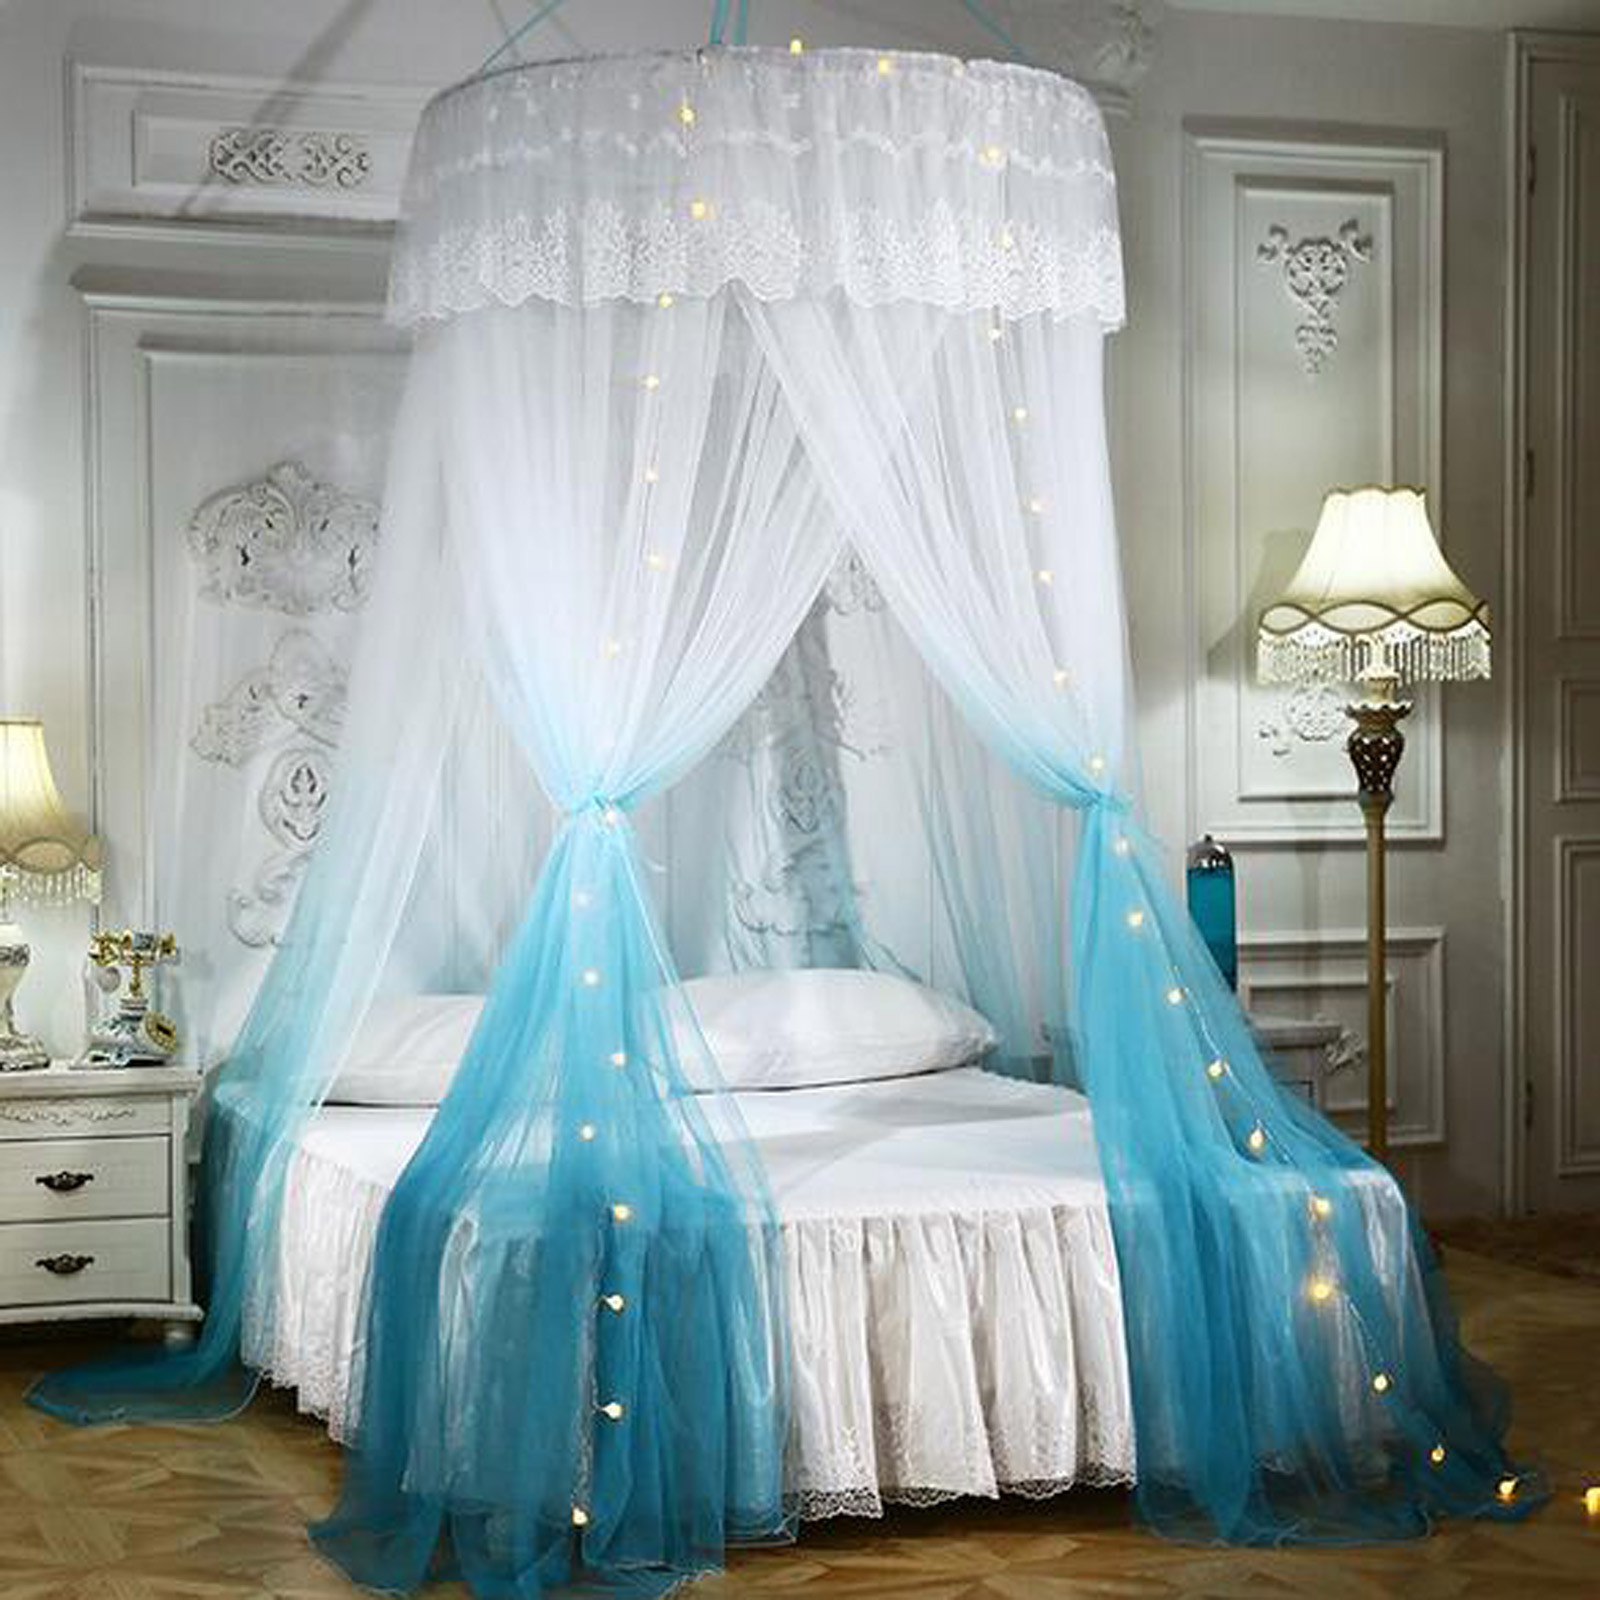 Large romantic color gradient dome mosquito curtains princess Dome mosquito net Home Dome Foldable Bed Canopy with Hook#T2